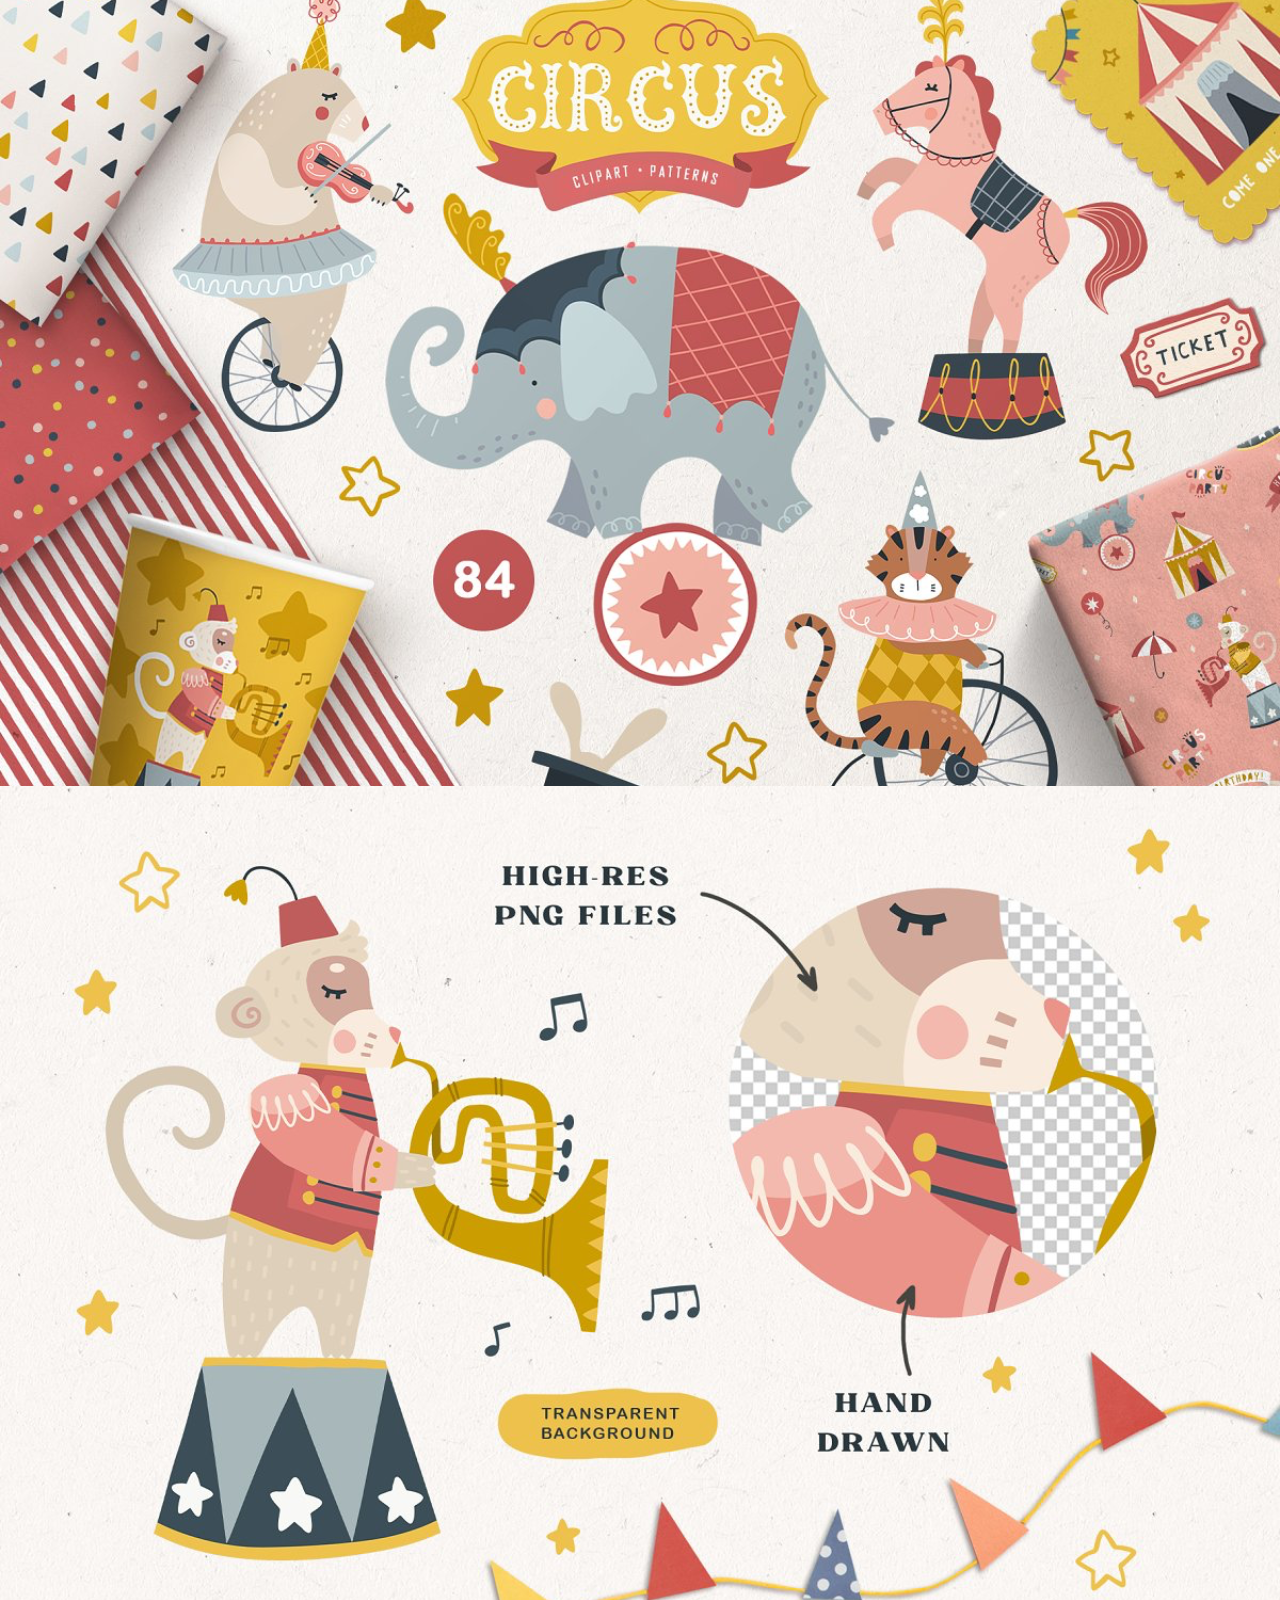 Circus animals pinterest image preview.